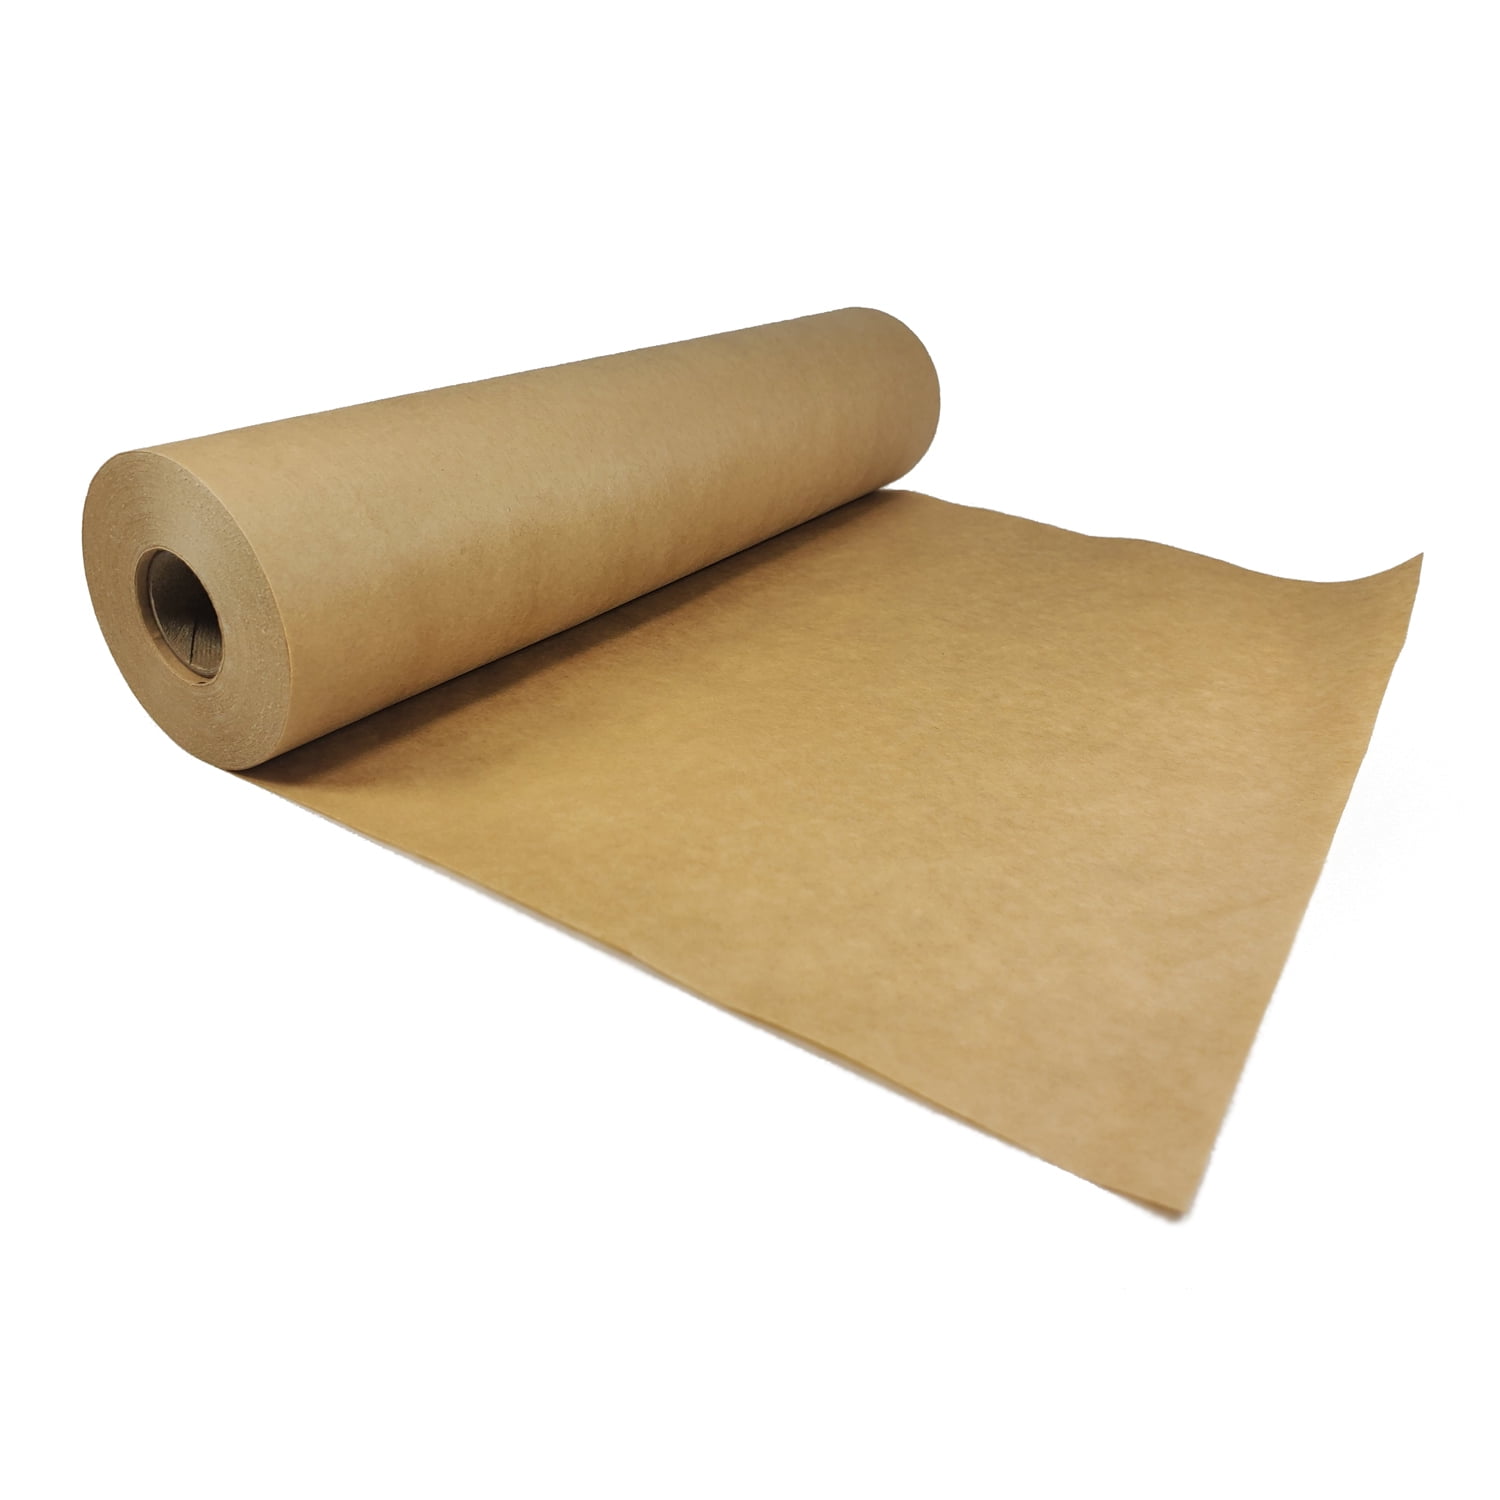 Brown Jumbo Kraft Paper Roll - 18 x 2100 (175') Made in The USA - Ideal  for